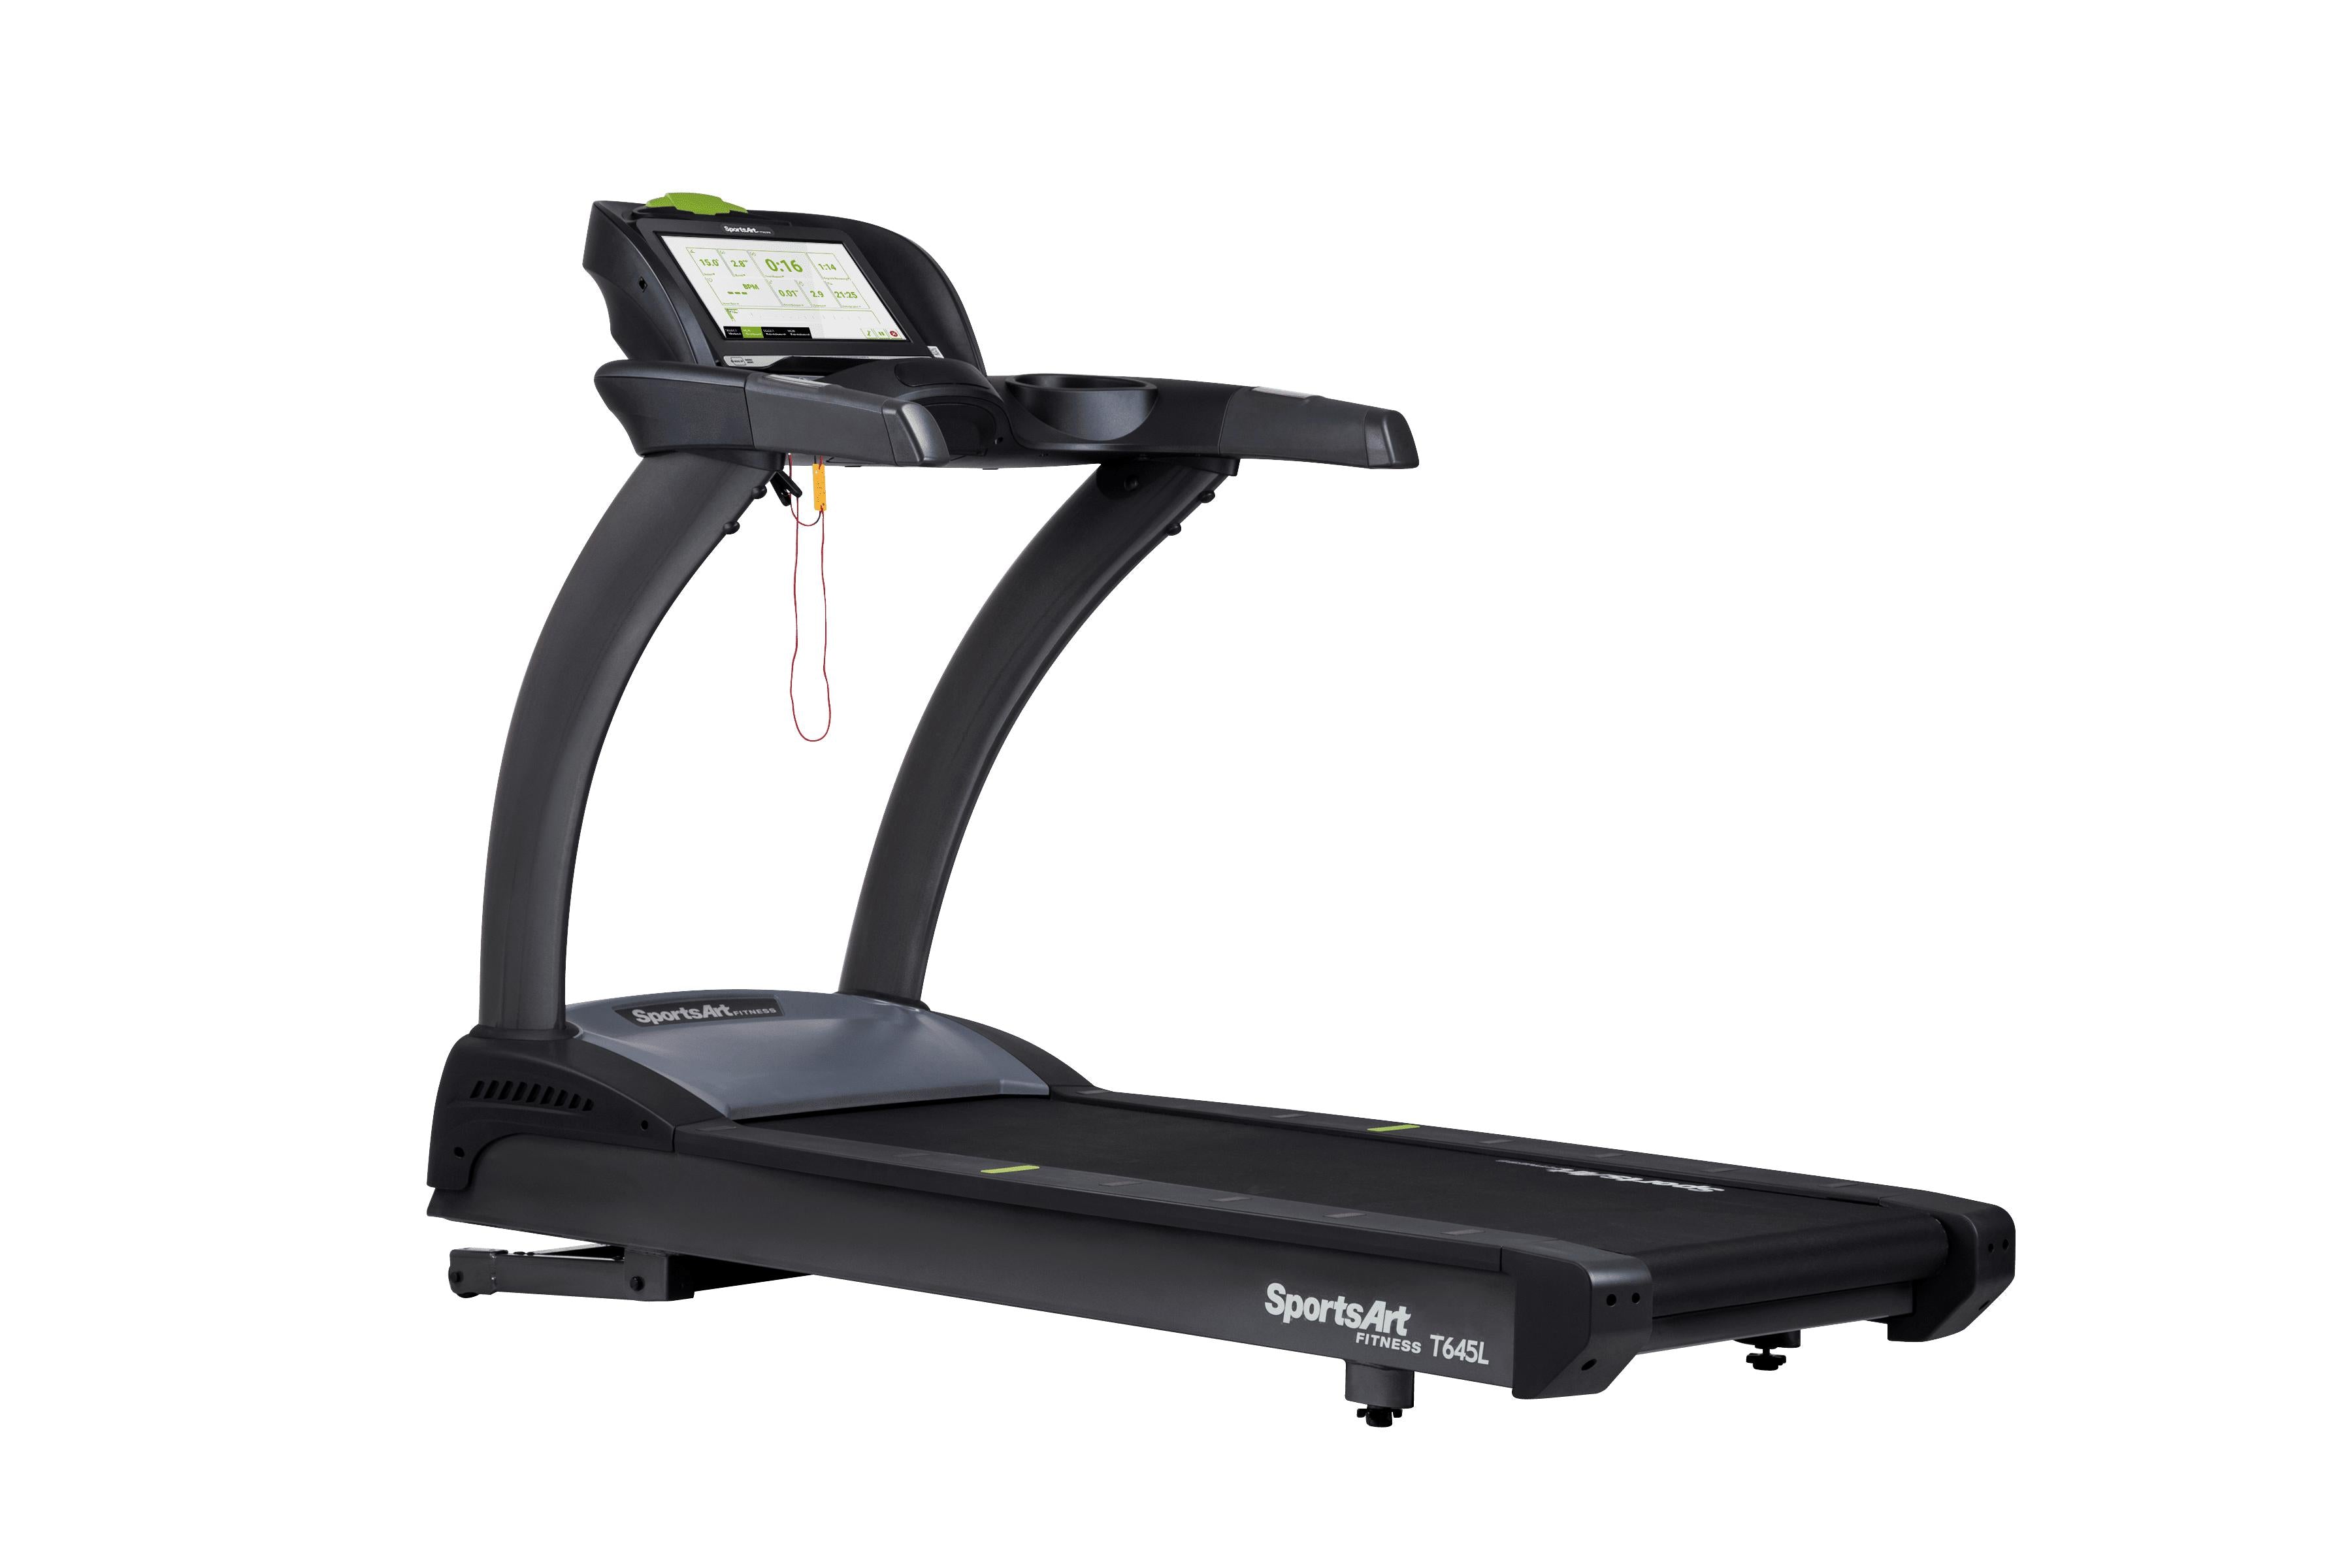 SportsArt Performance Treadmill T645L side view with console toward the left hand side